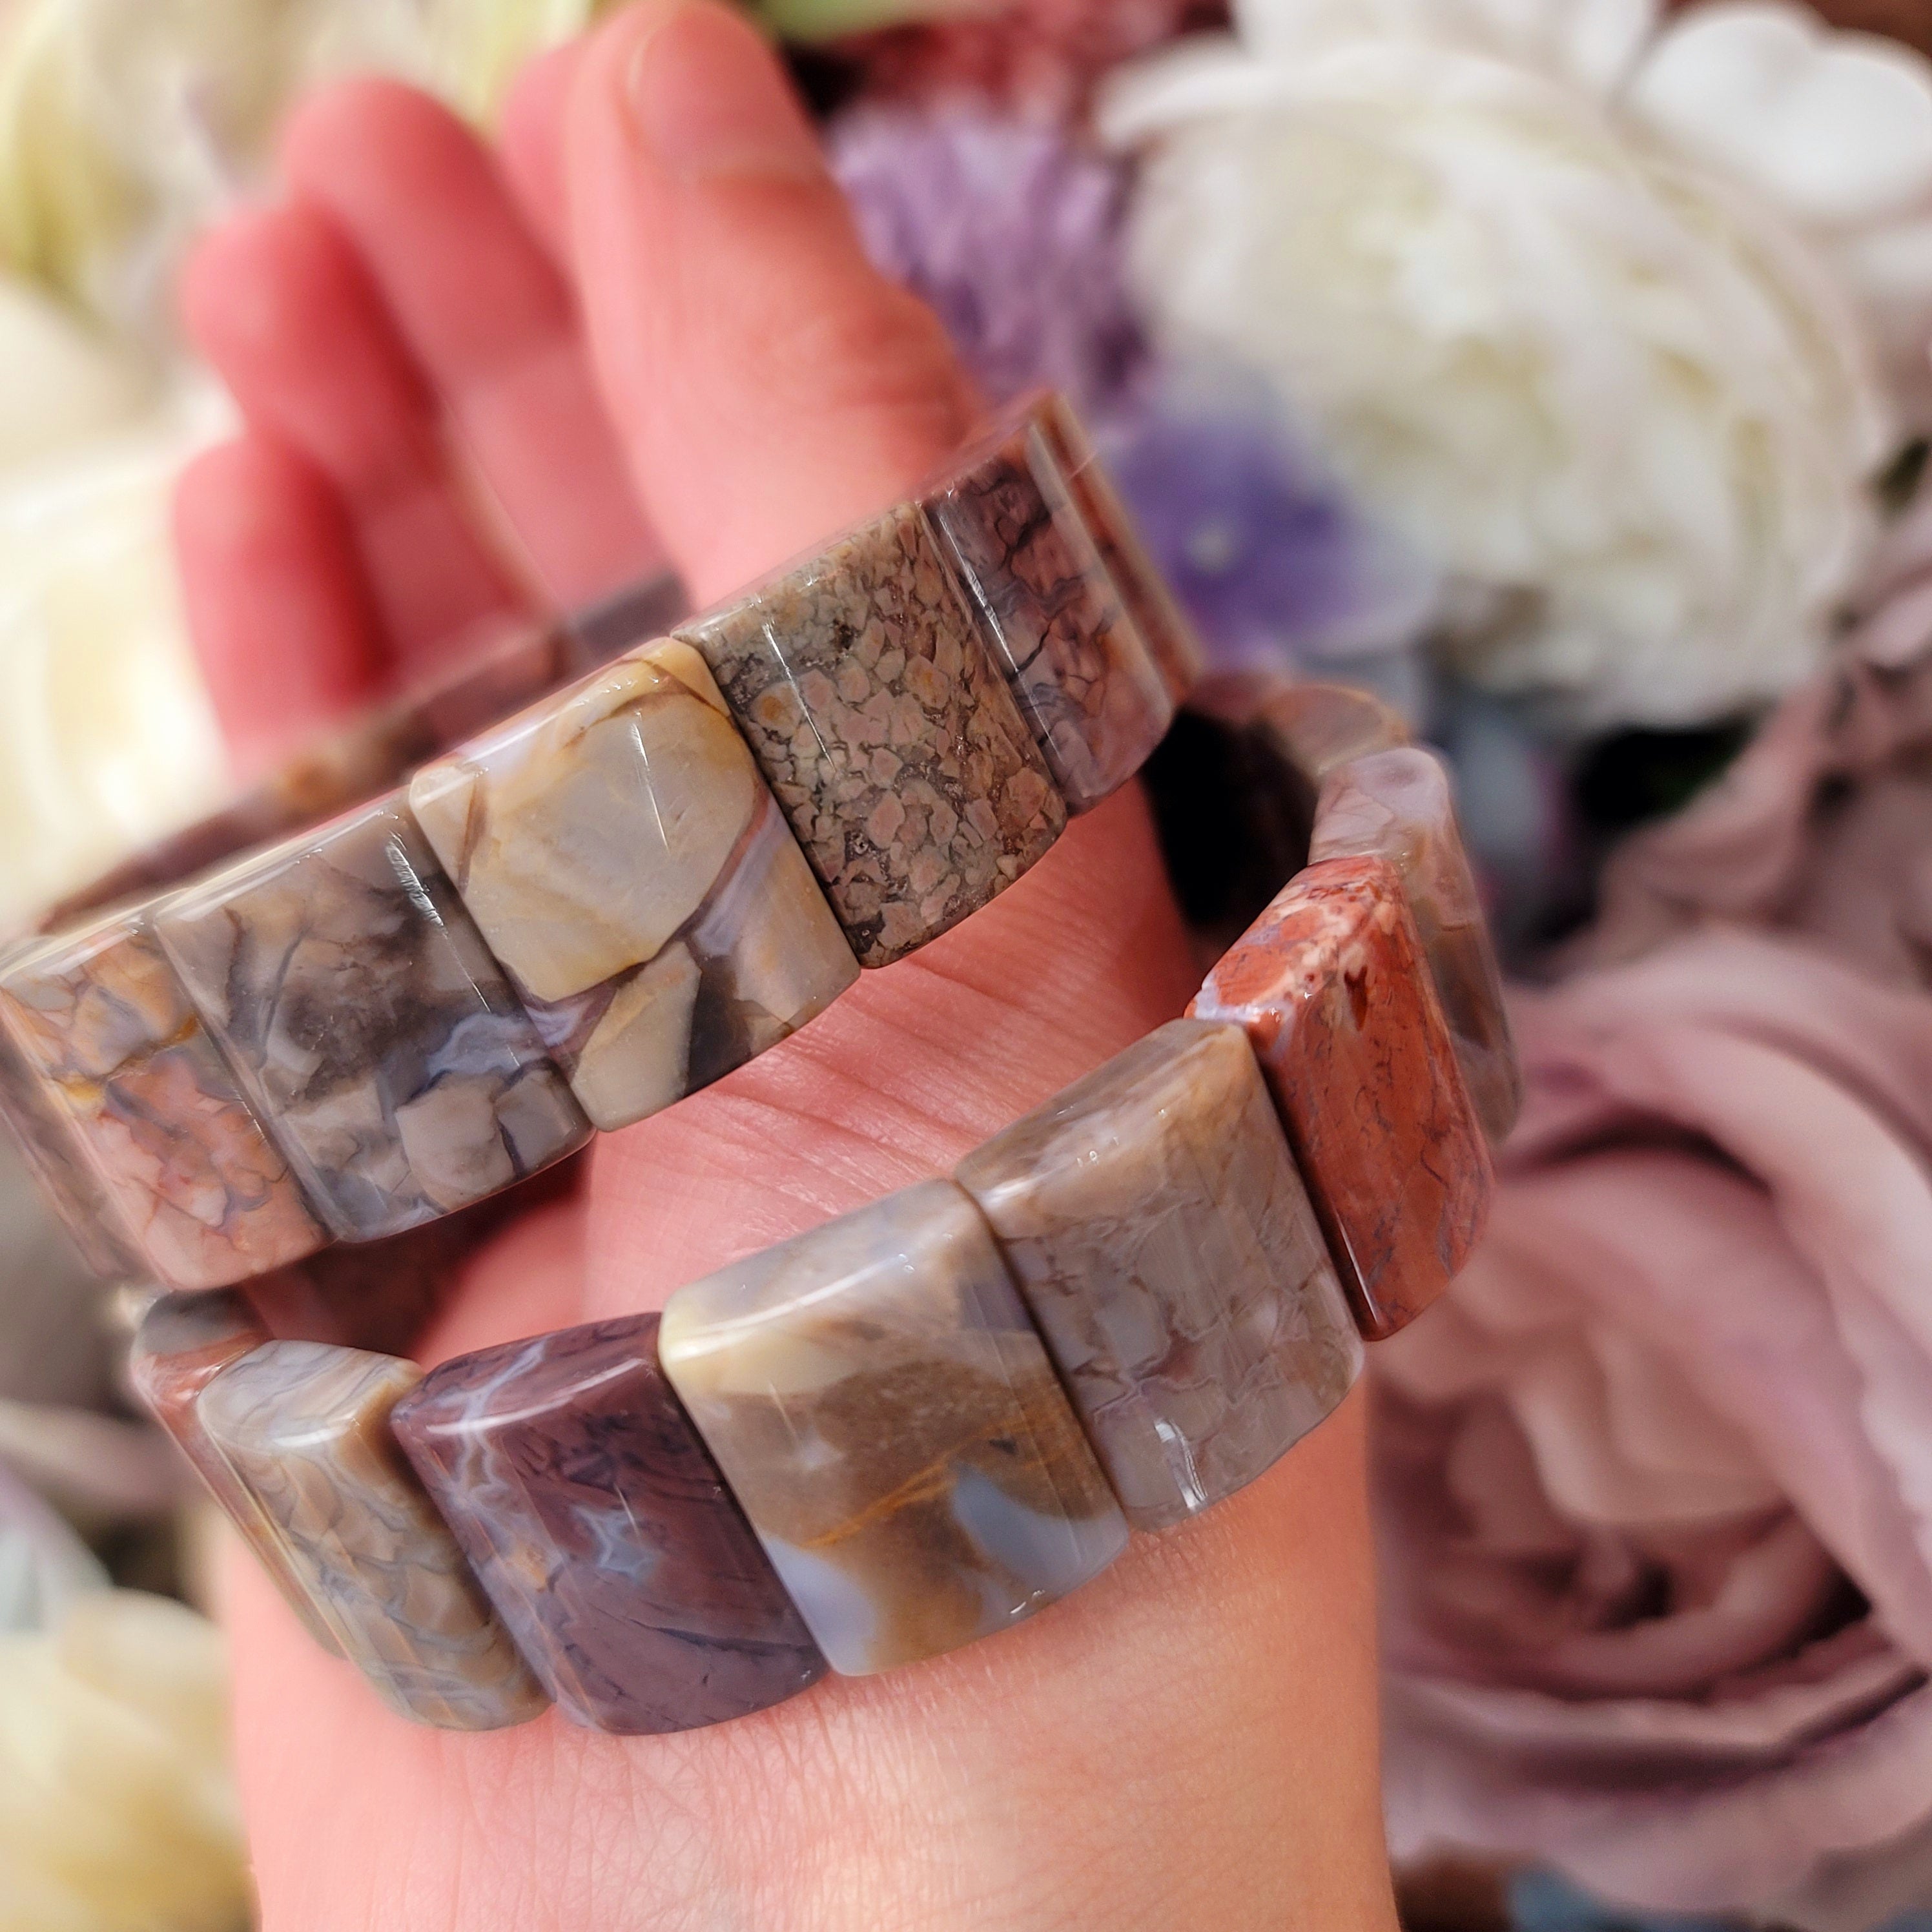 Crackle Alashan Agate Bangle Bracelet (High Quality) for Chasing your Dreams, Enhanced Memory, Protection & Stress Relief